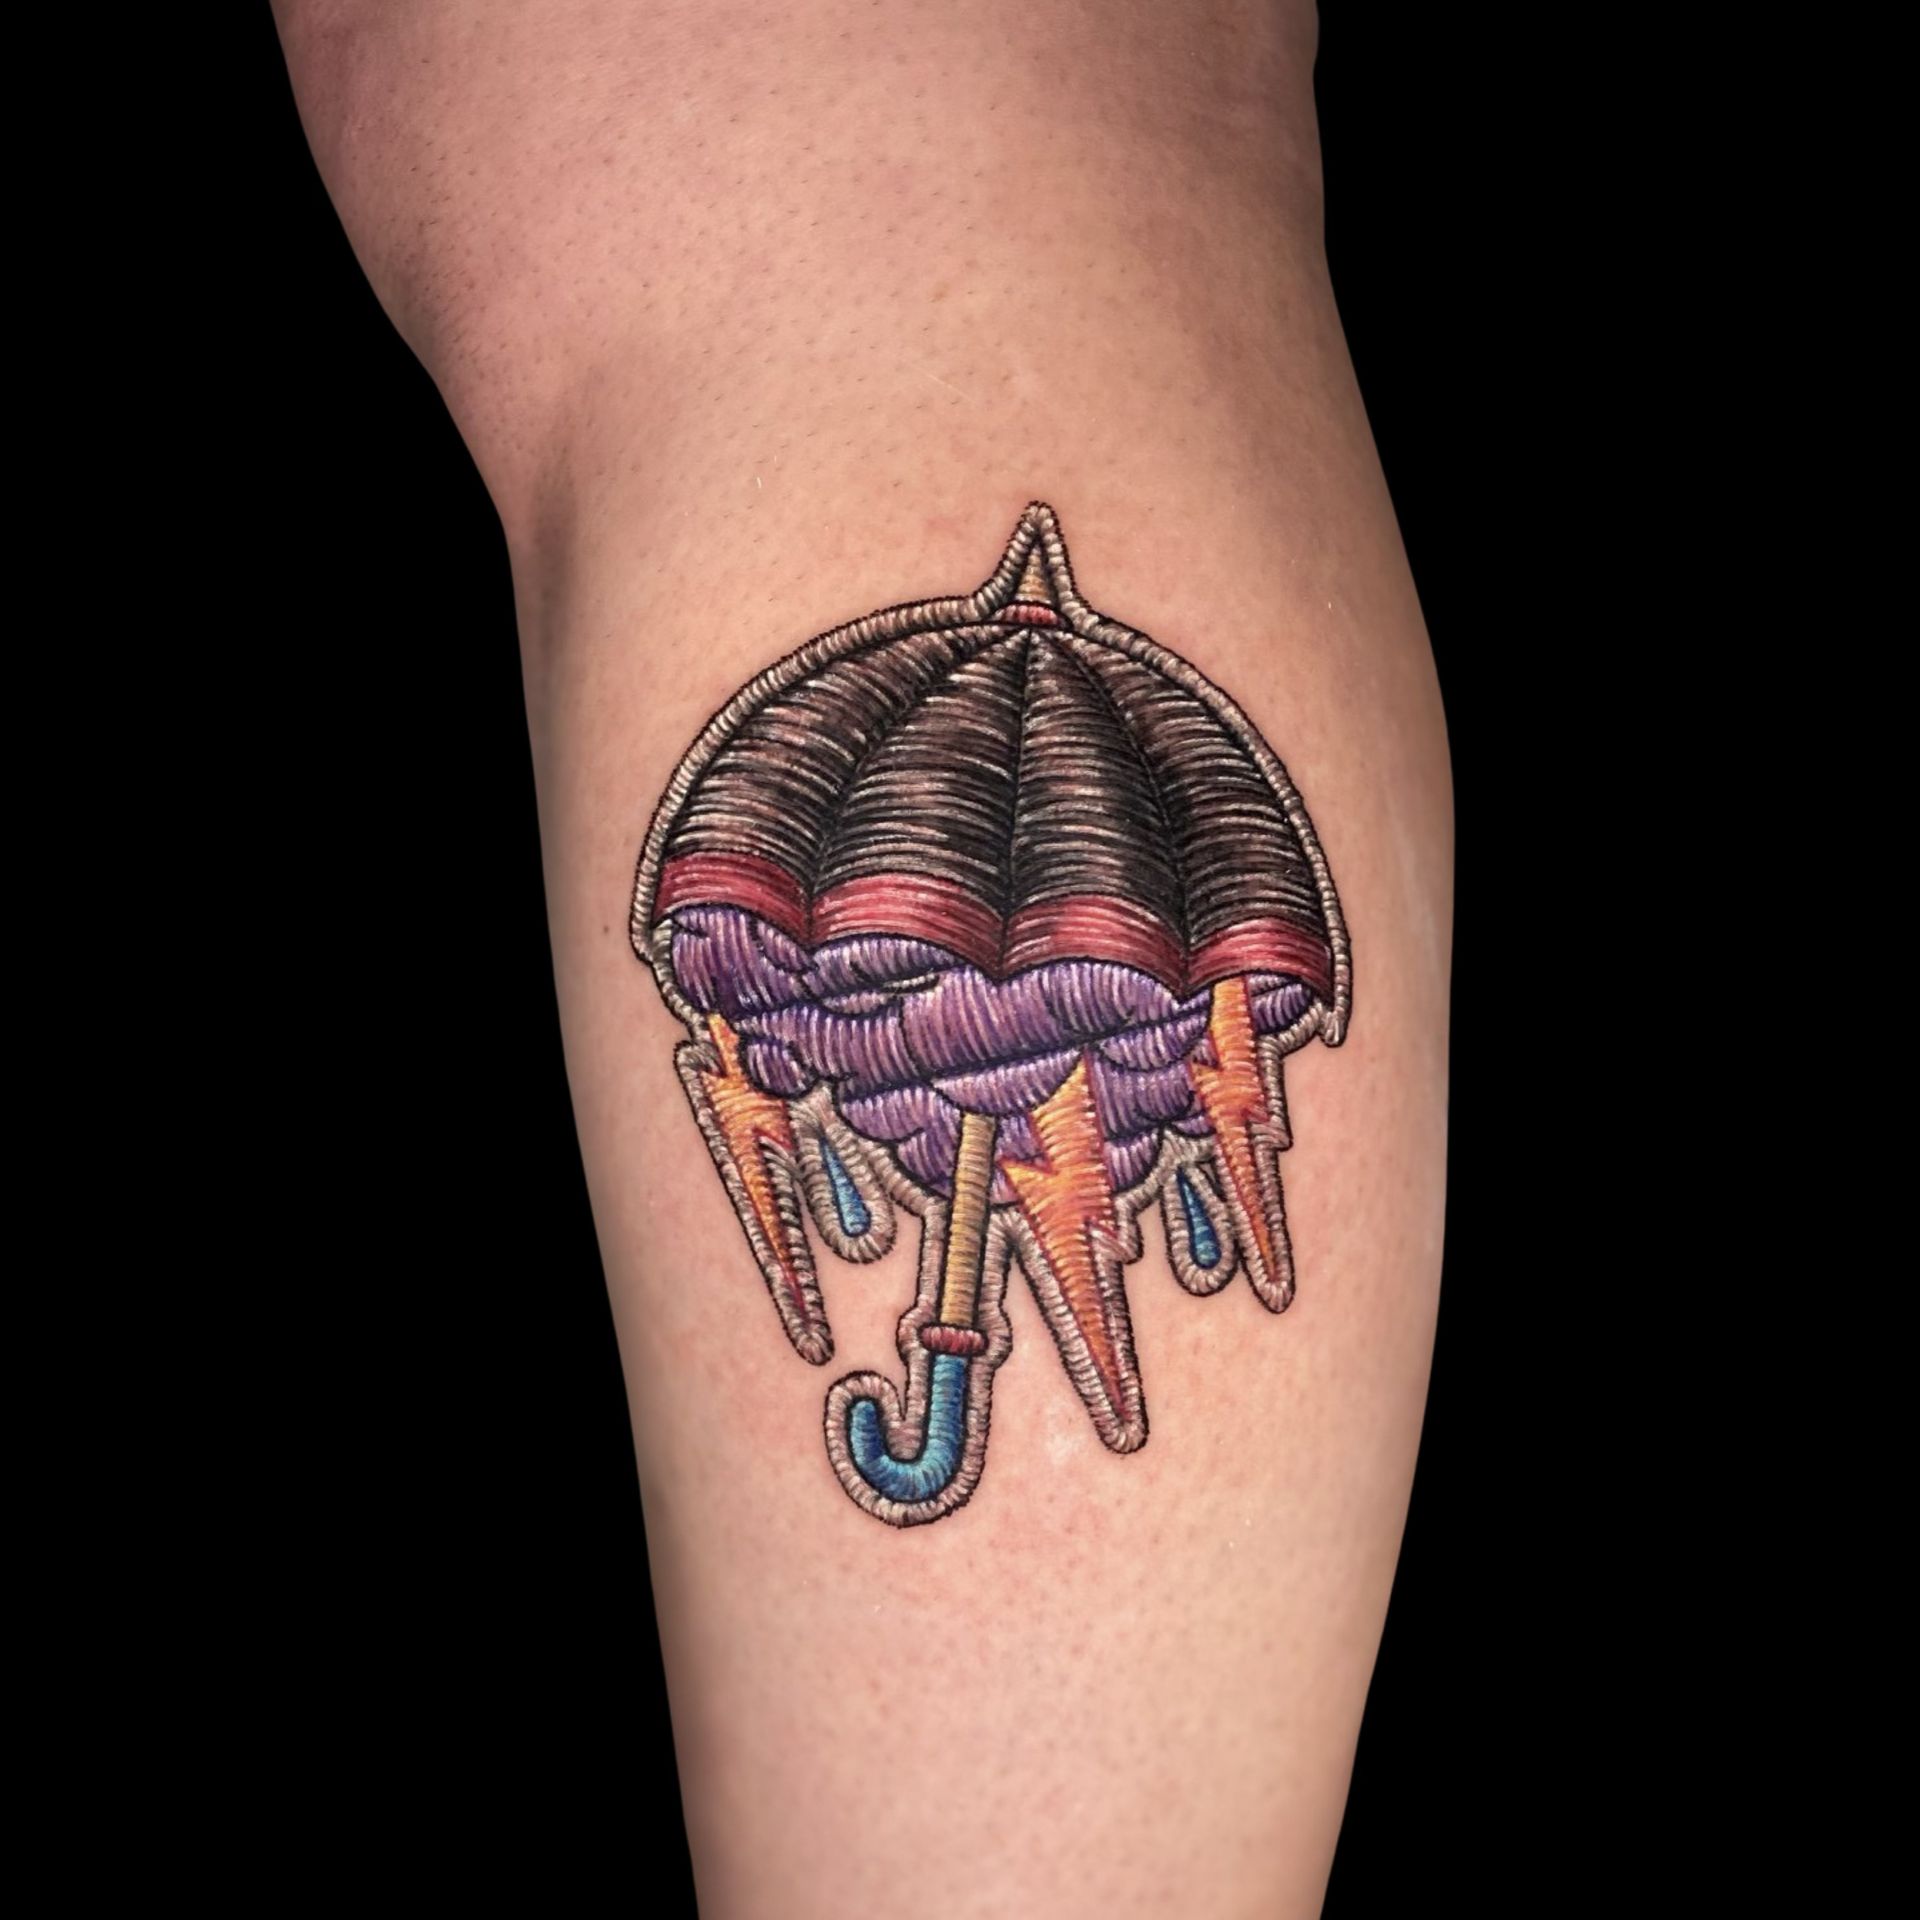 a tattoo of an umbrella with lightning bolts coming out of it